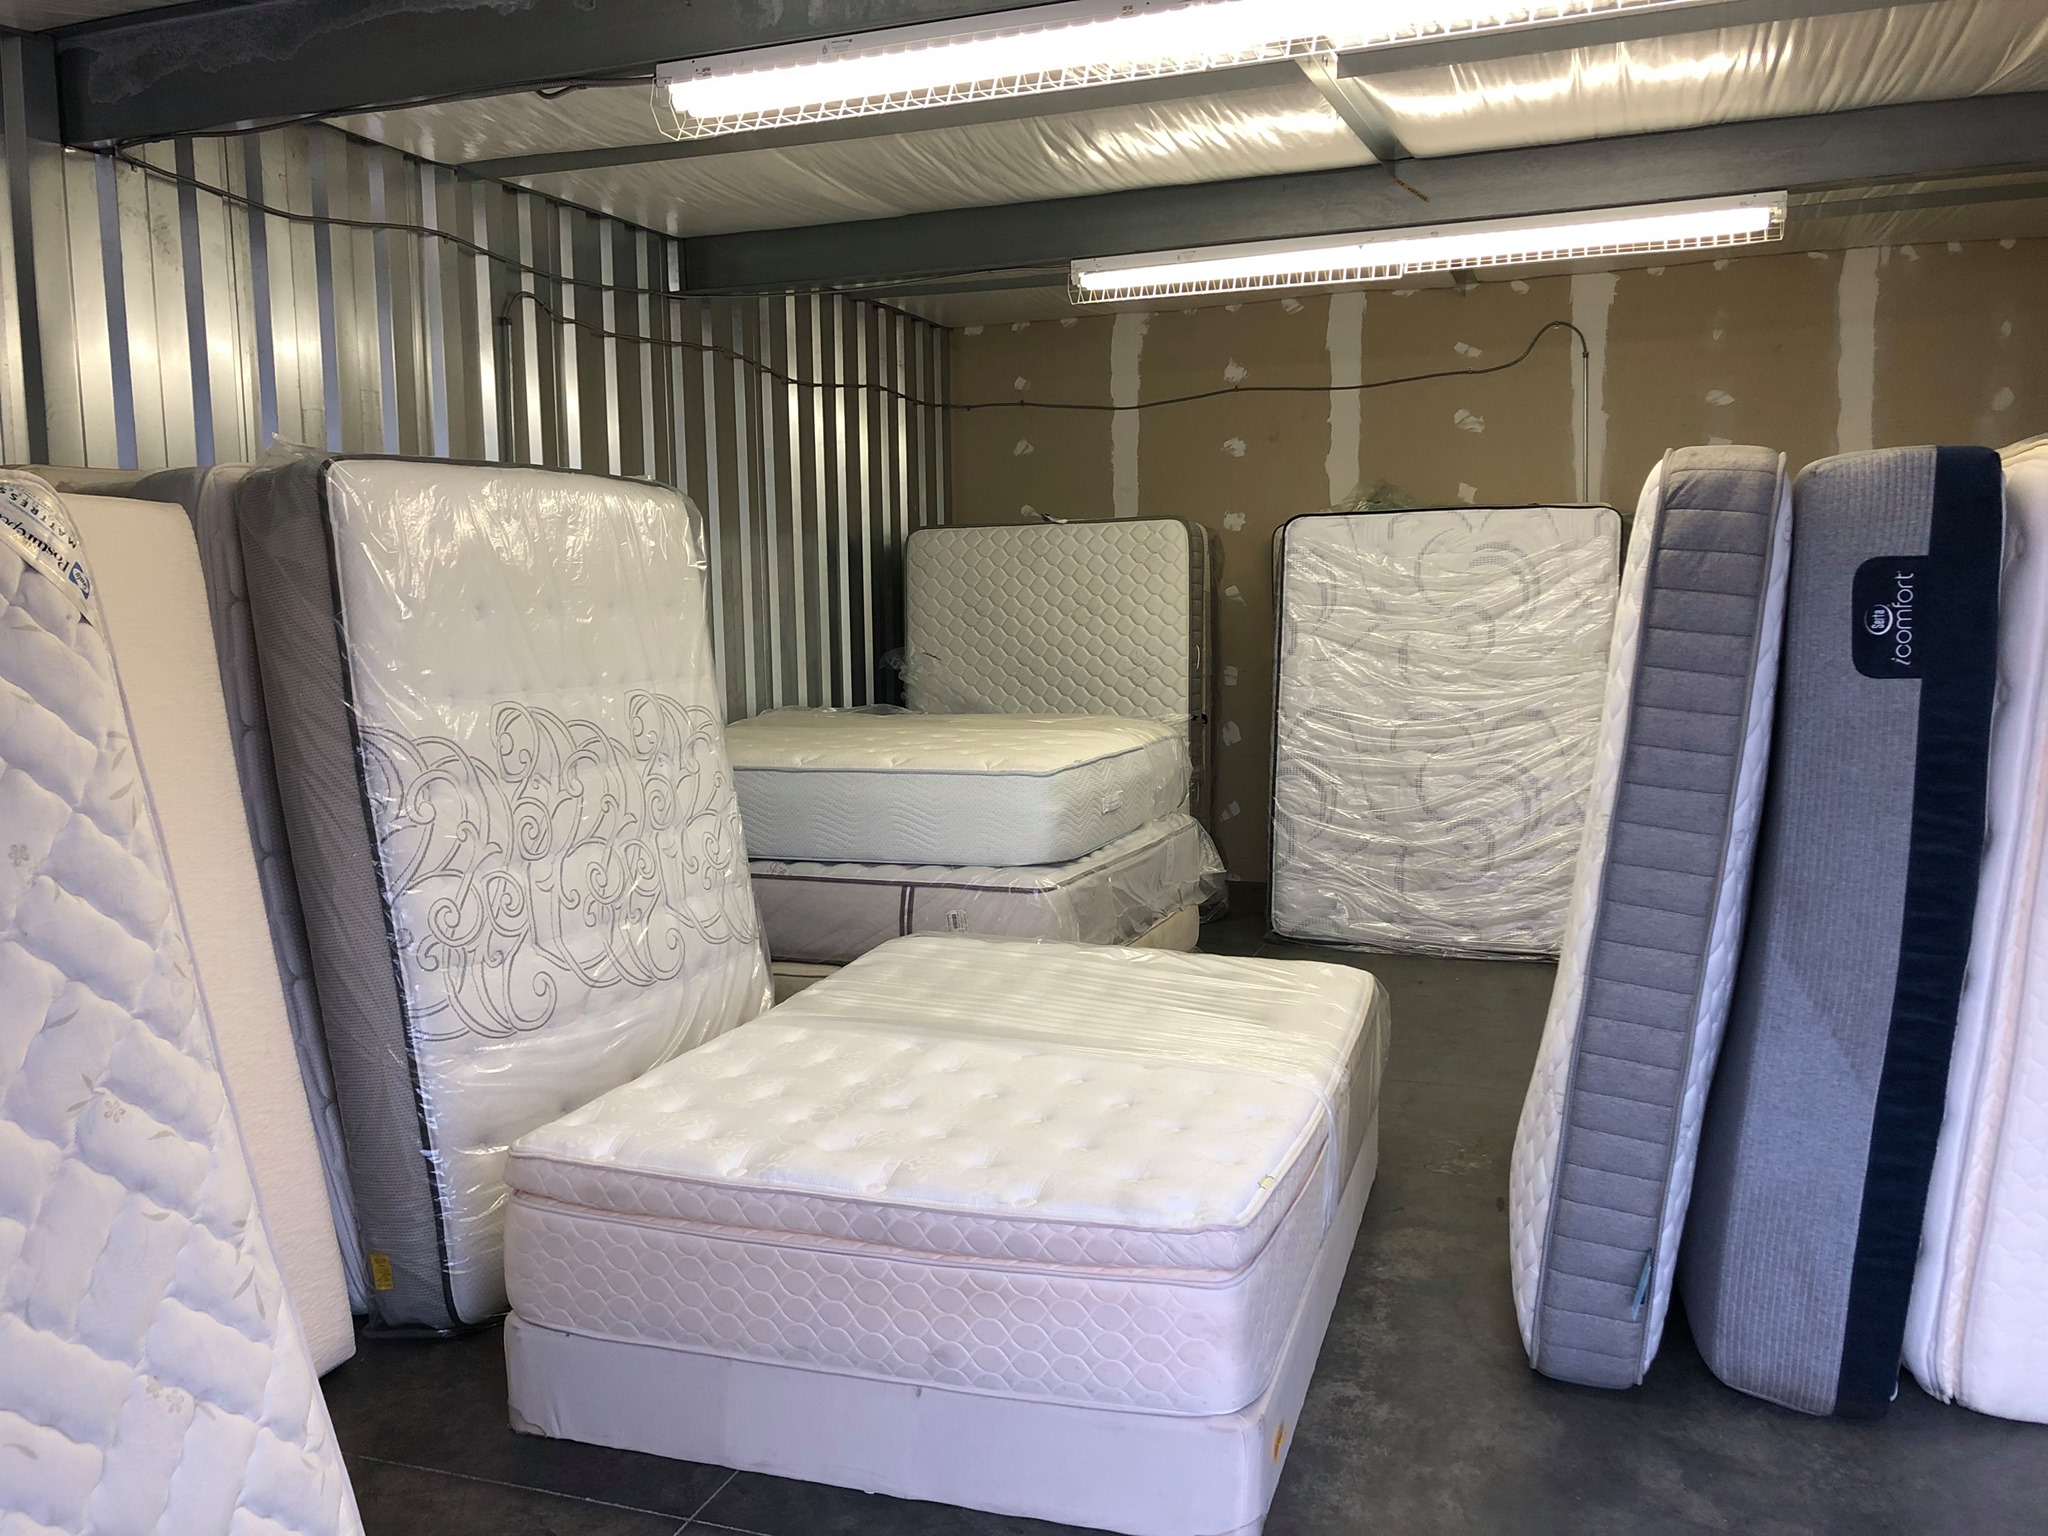 Guide to choosing cheap Mattresses & Sets Colonial Heights VA